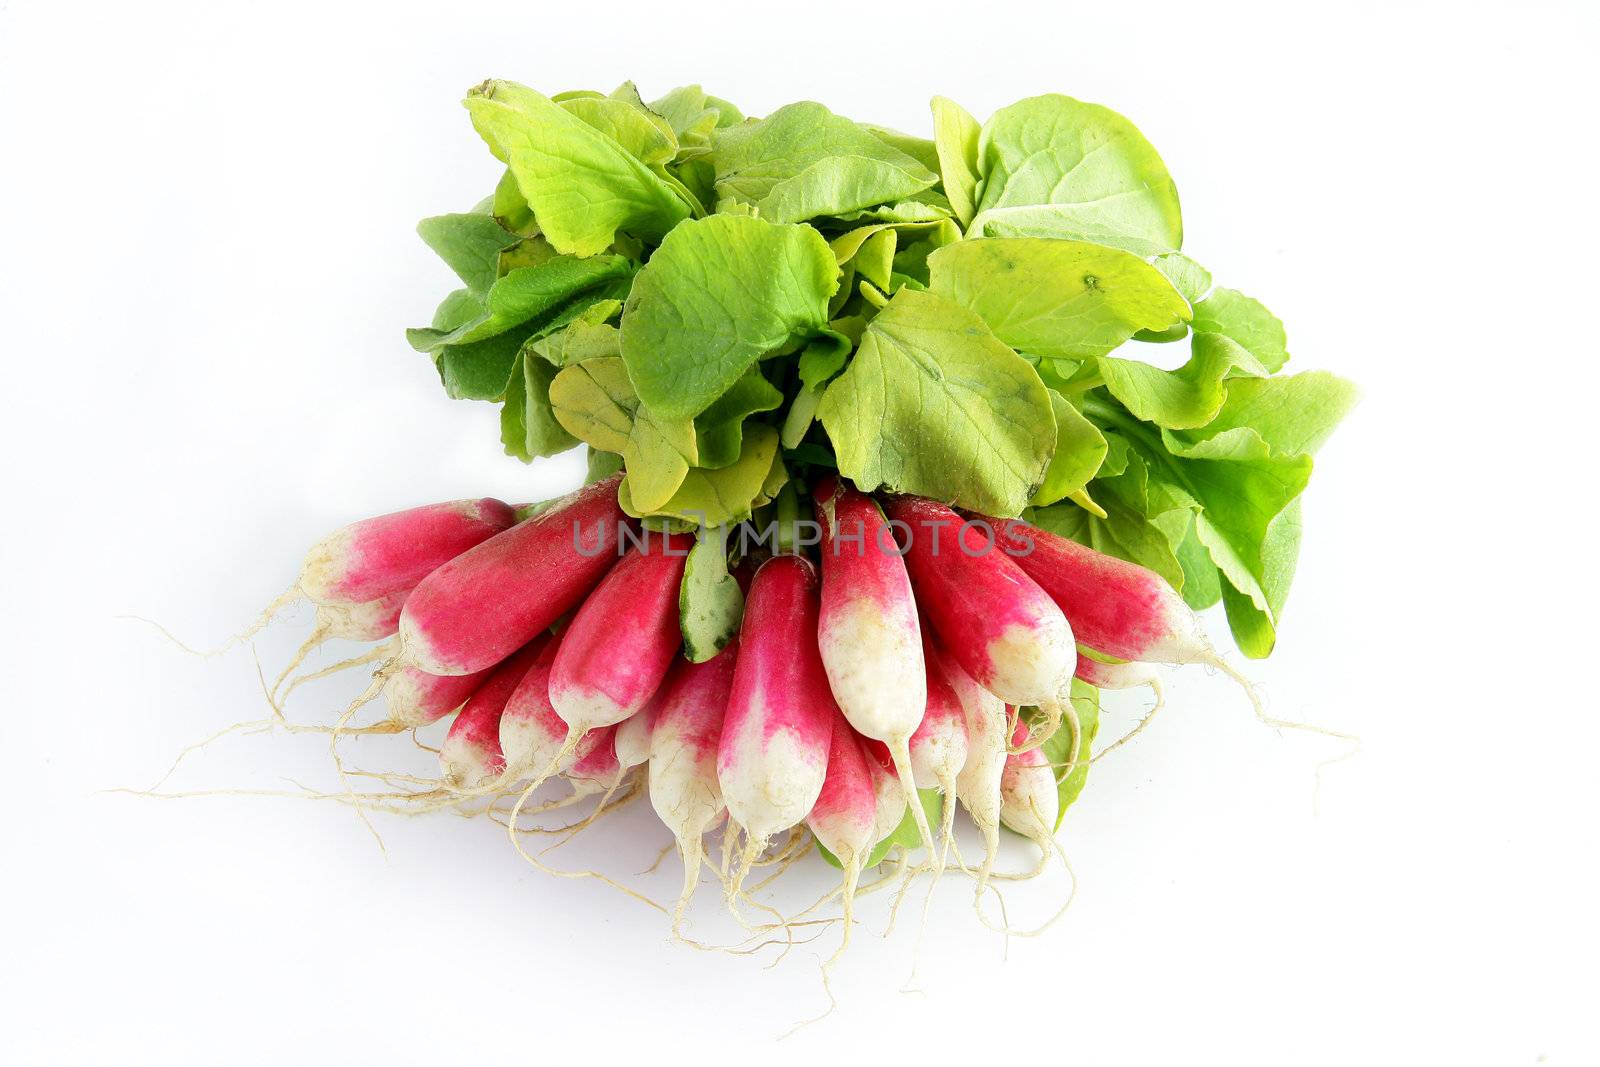 Bunch of radishes by phovoir